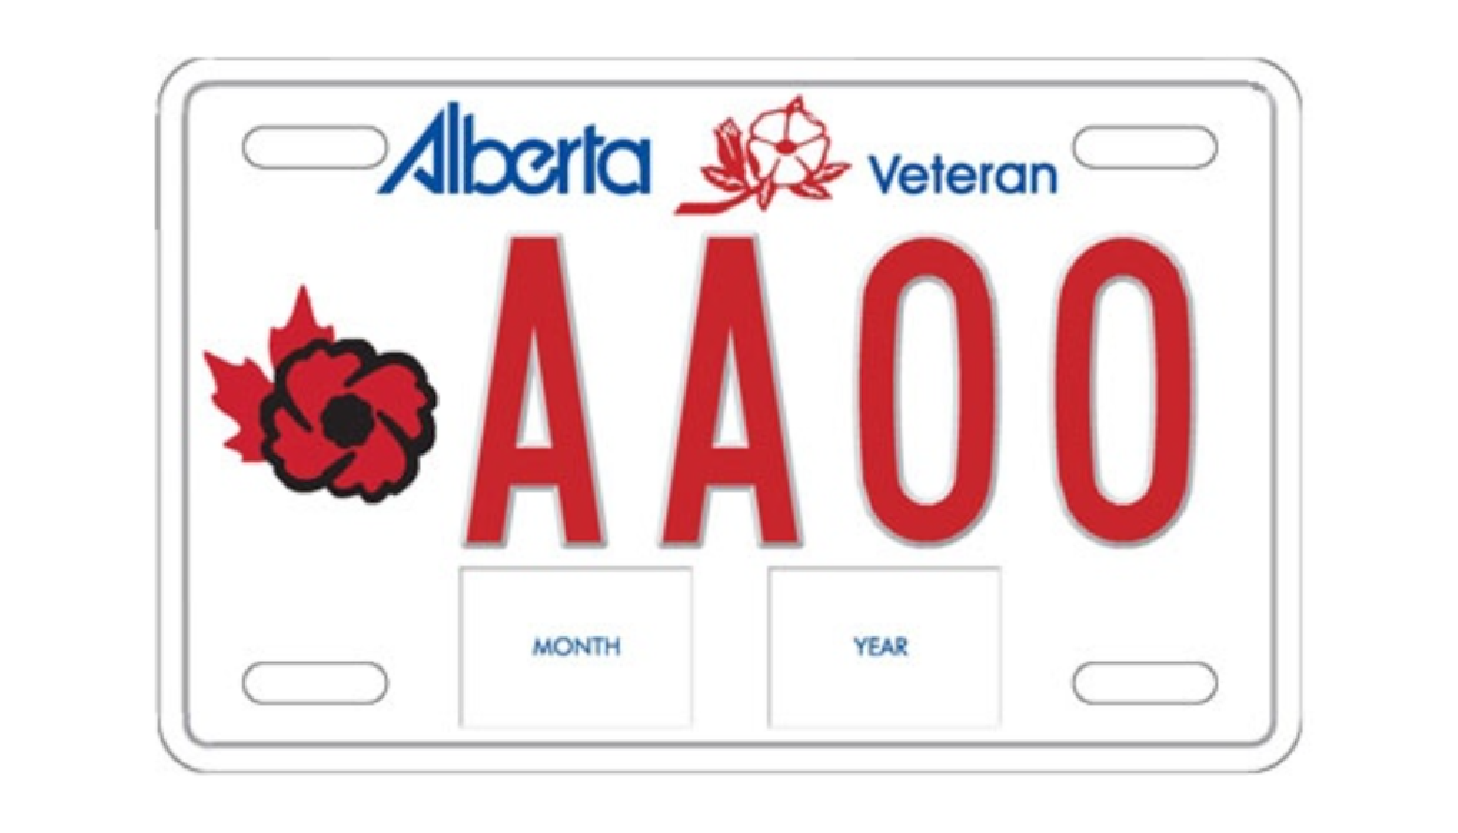 Free parking is available in Red Deer for Veteran's licence plate holders